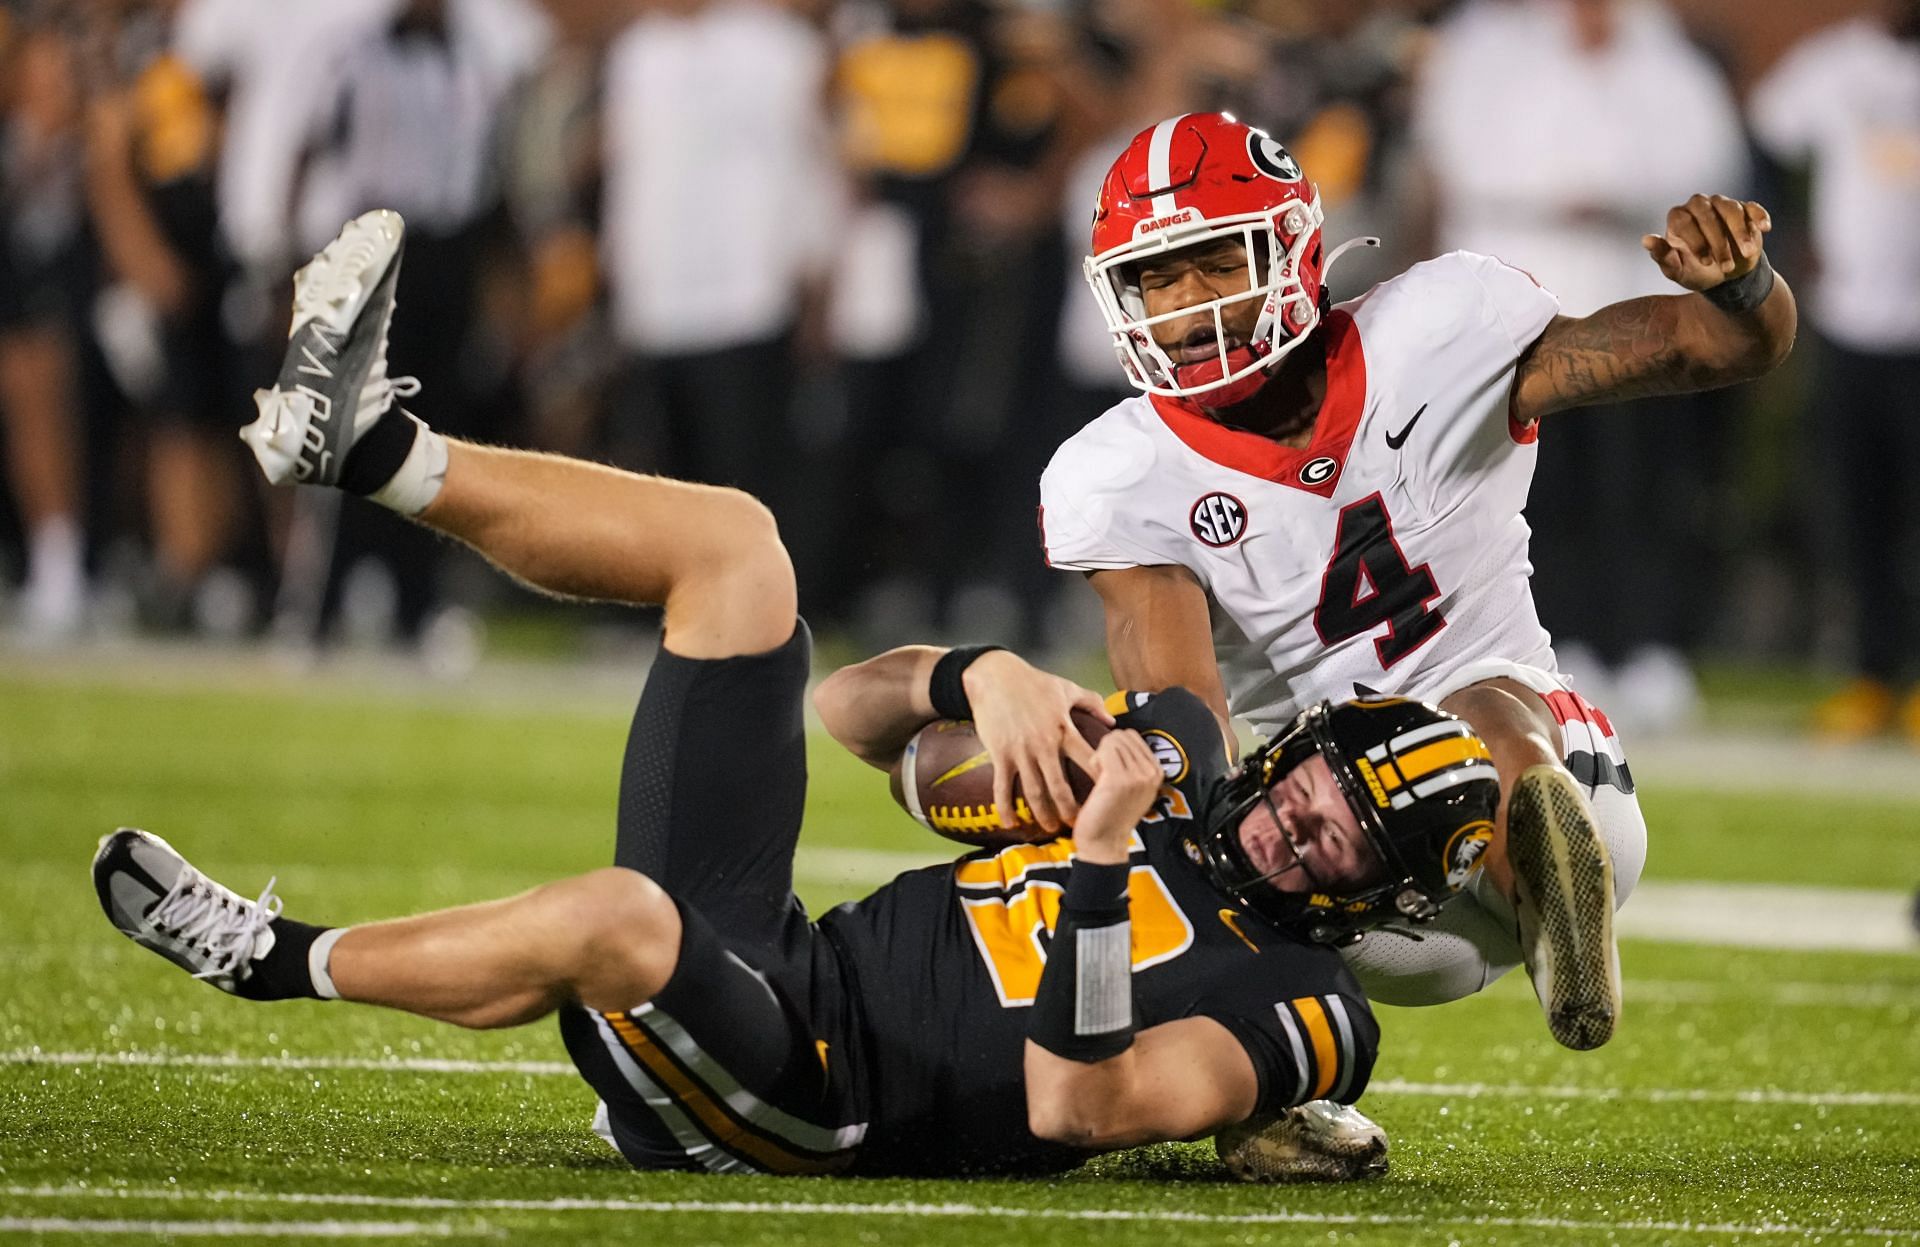 Brady Cook #12 of the Missouri Tigers is tackled by Nolan Smith #4 of the Georgia Bulldogs